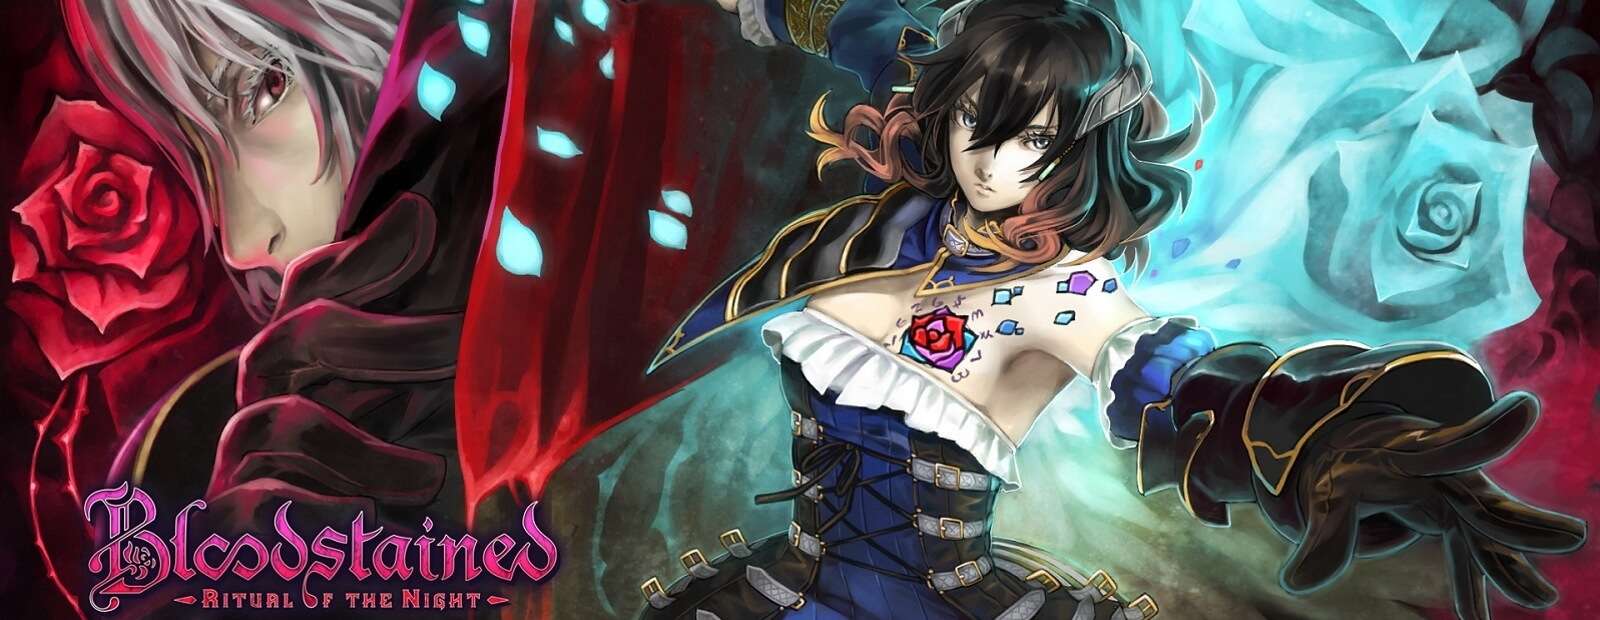 Гра Bloodstained: Ritual of the Night